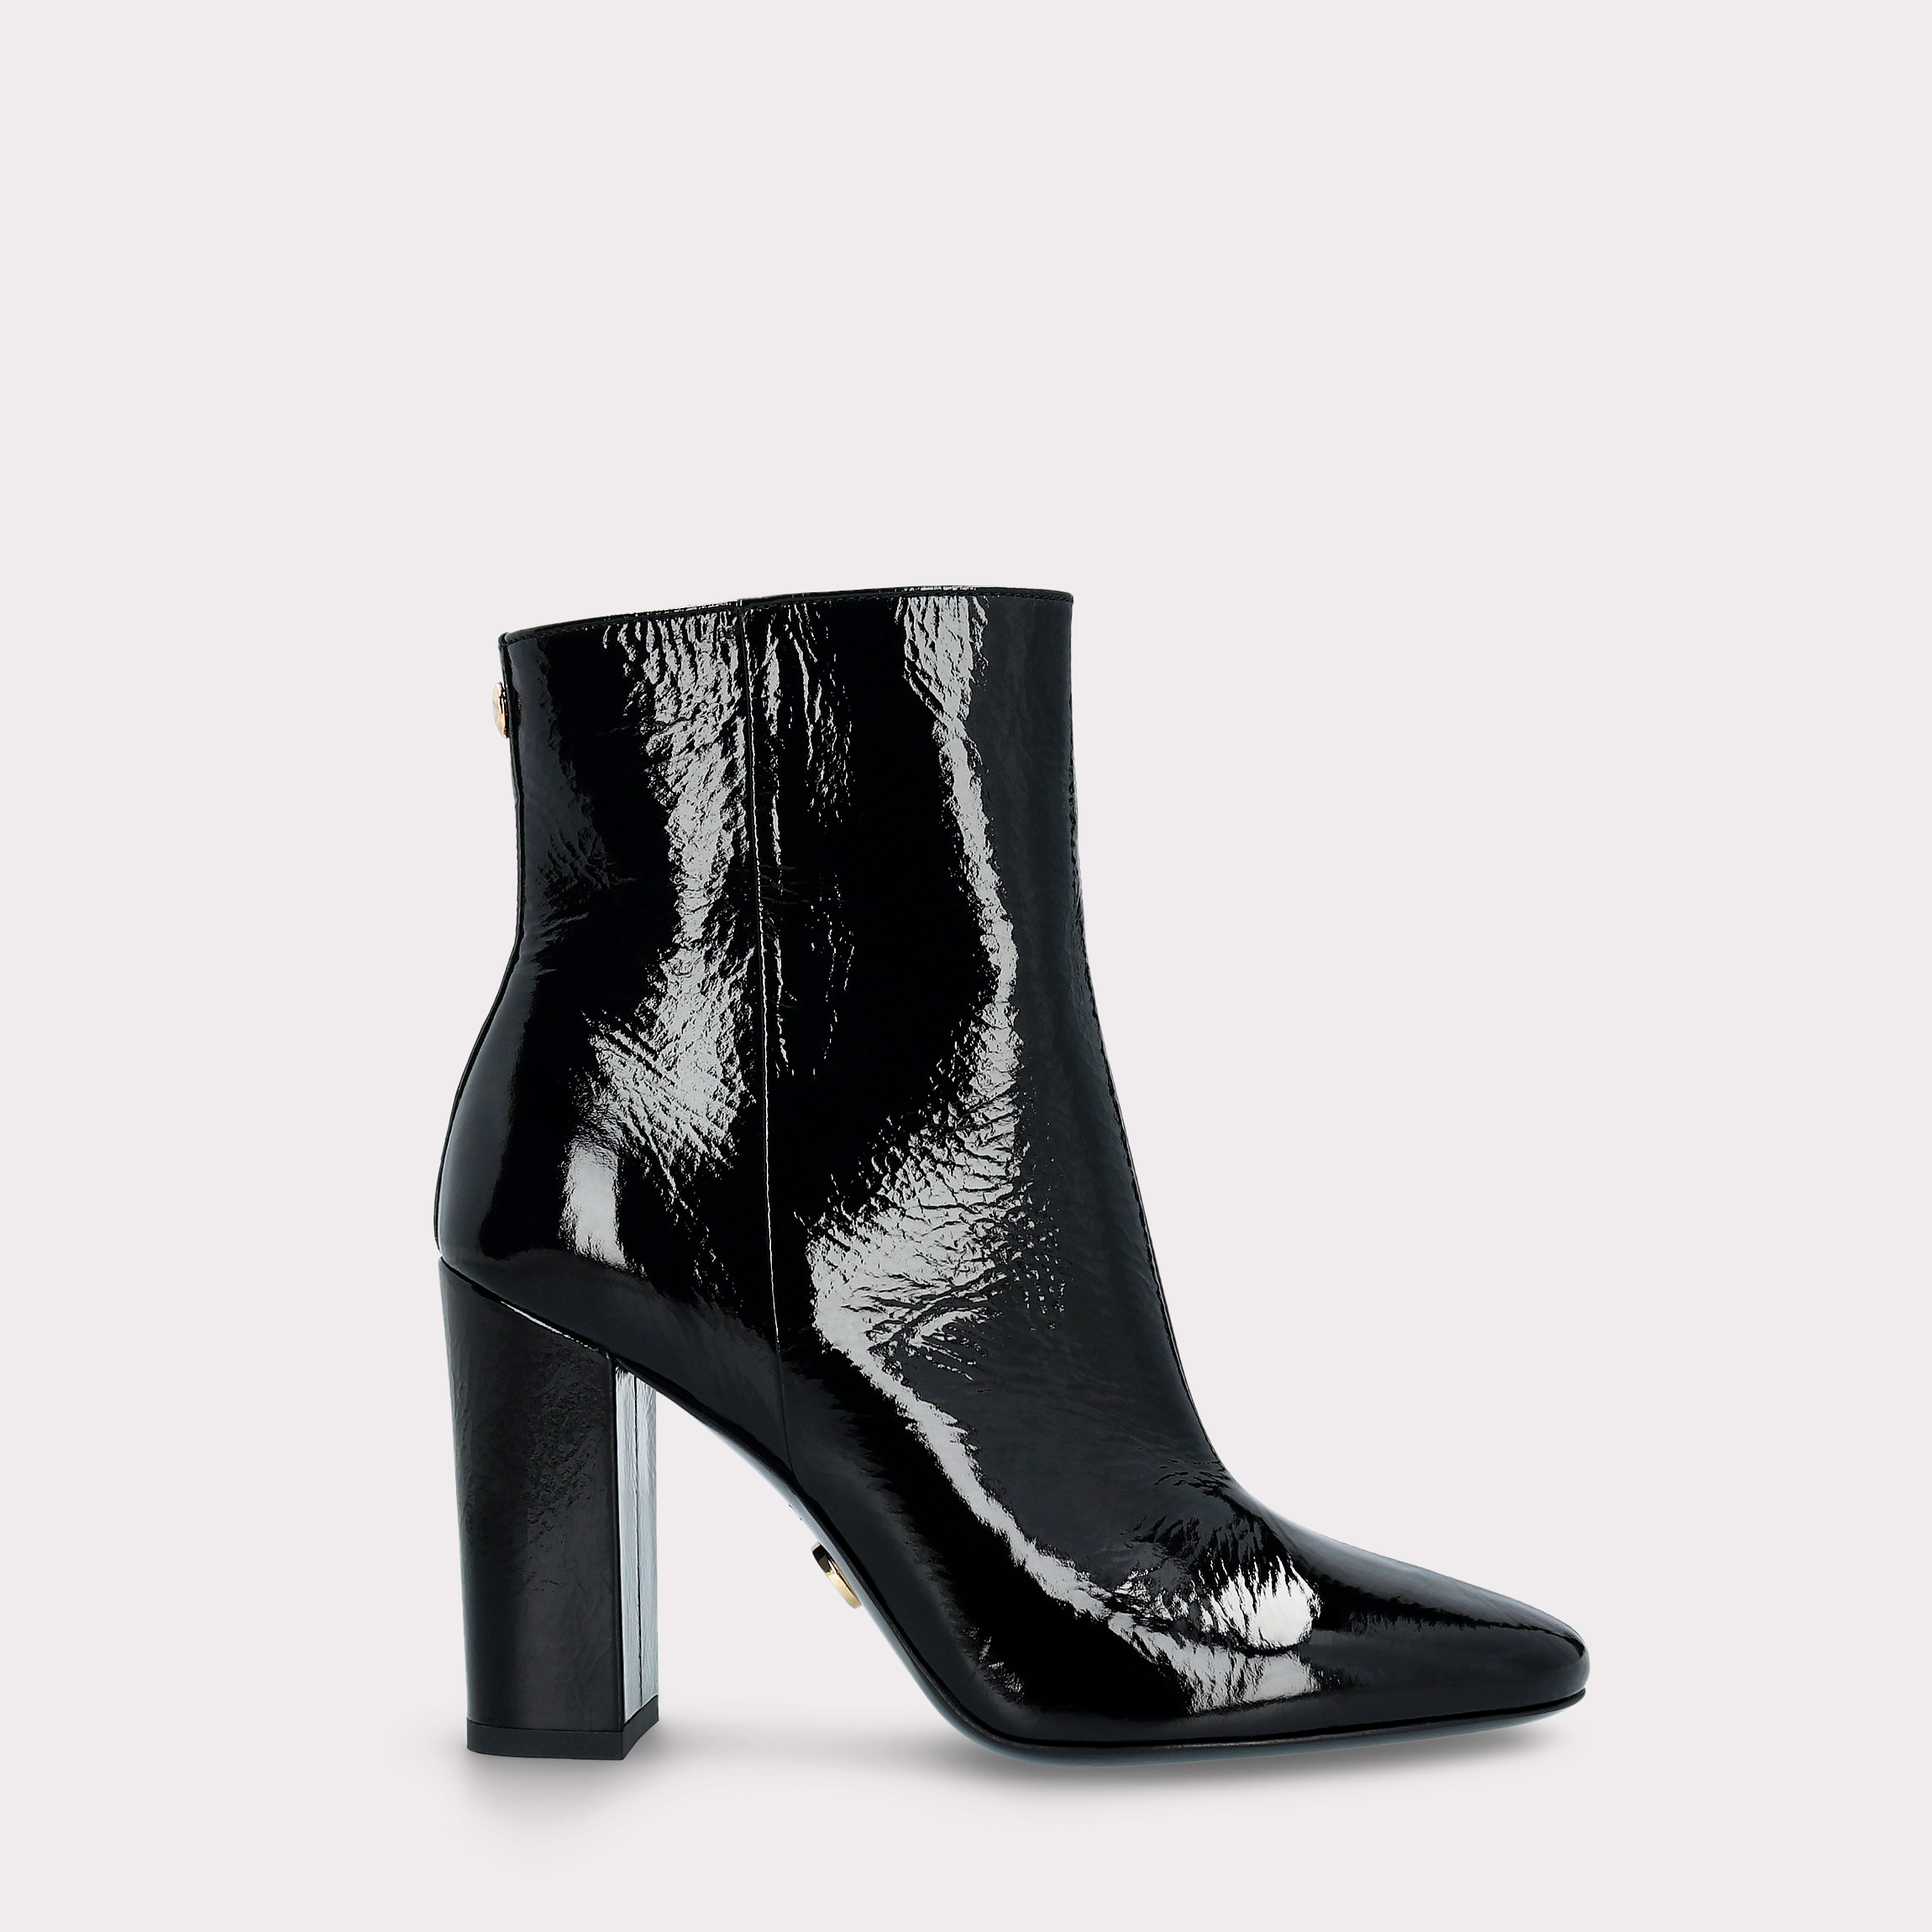 DELMA ZIP 02 BLACK CRUSHED PATENT LEATHER ANKLE BOOTS